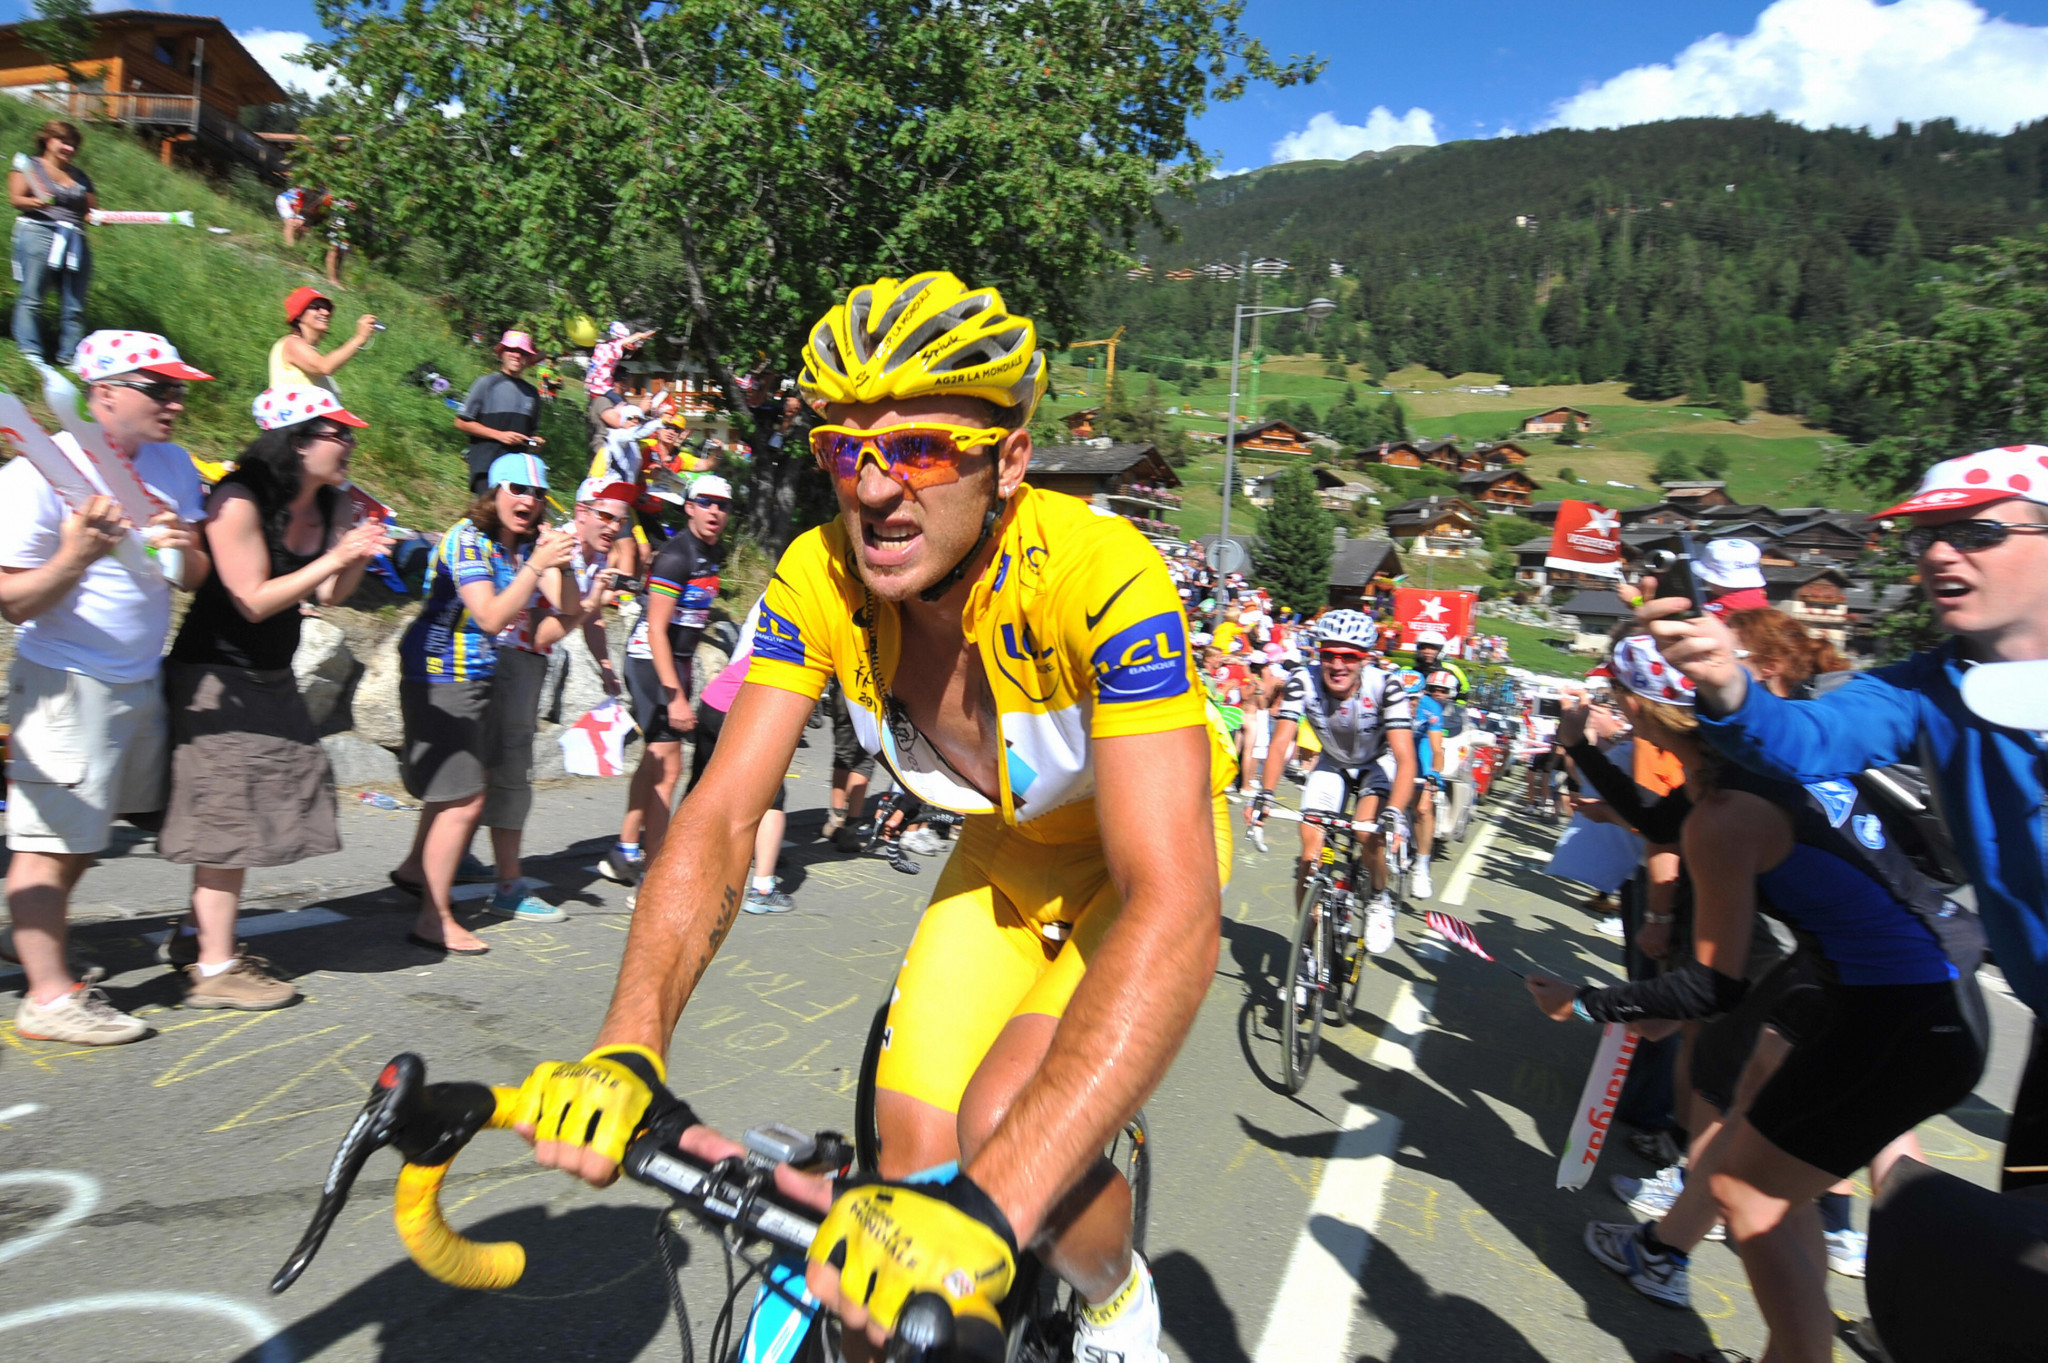 Former Tour de France race leader Nocentini handed four-year doping ban